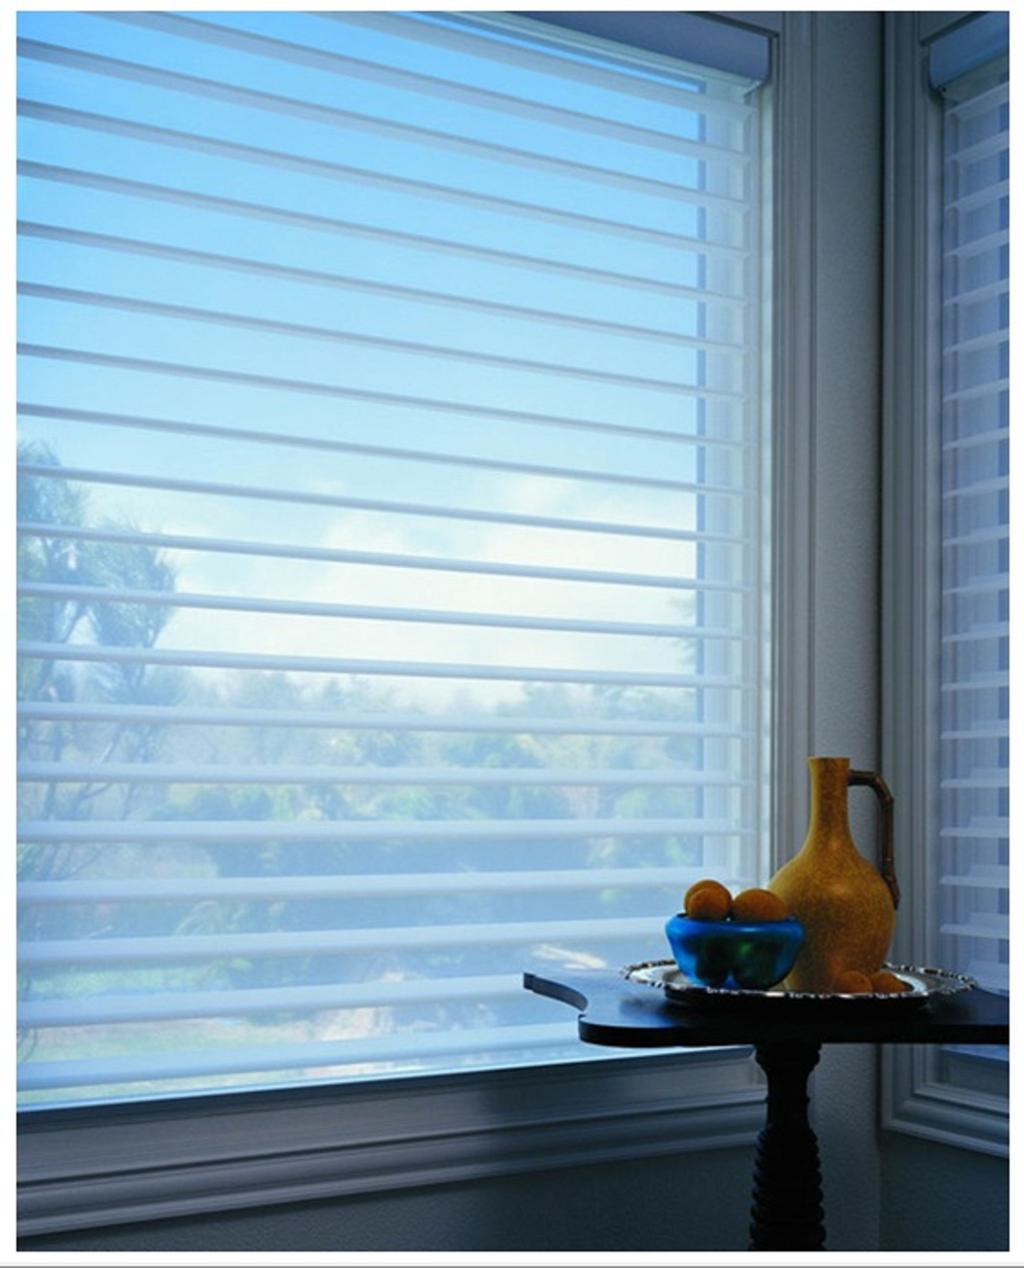 Whisper Pleated Blinds Whisper Blinds come in several different forms.